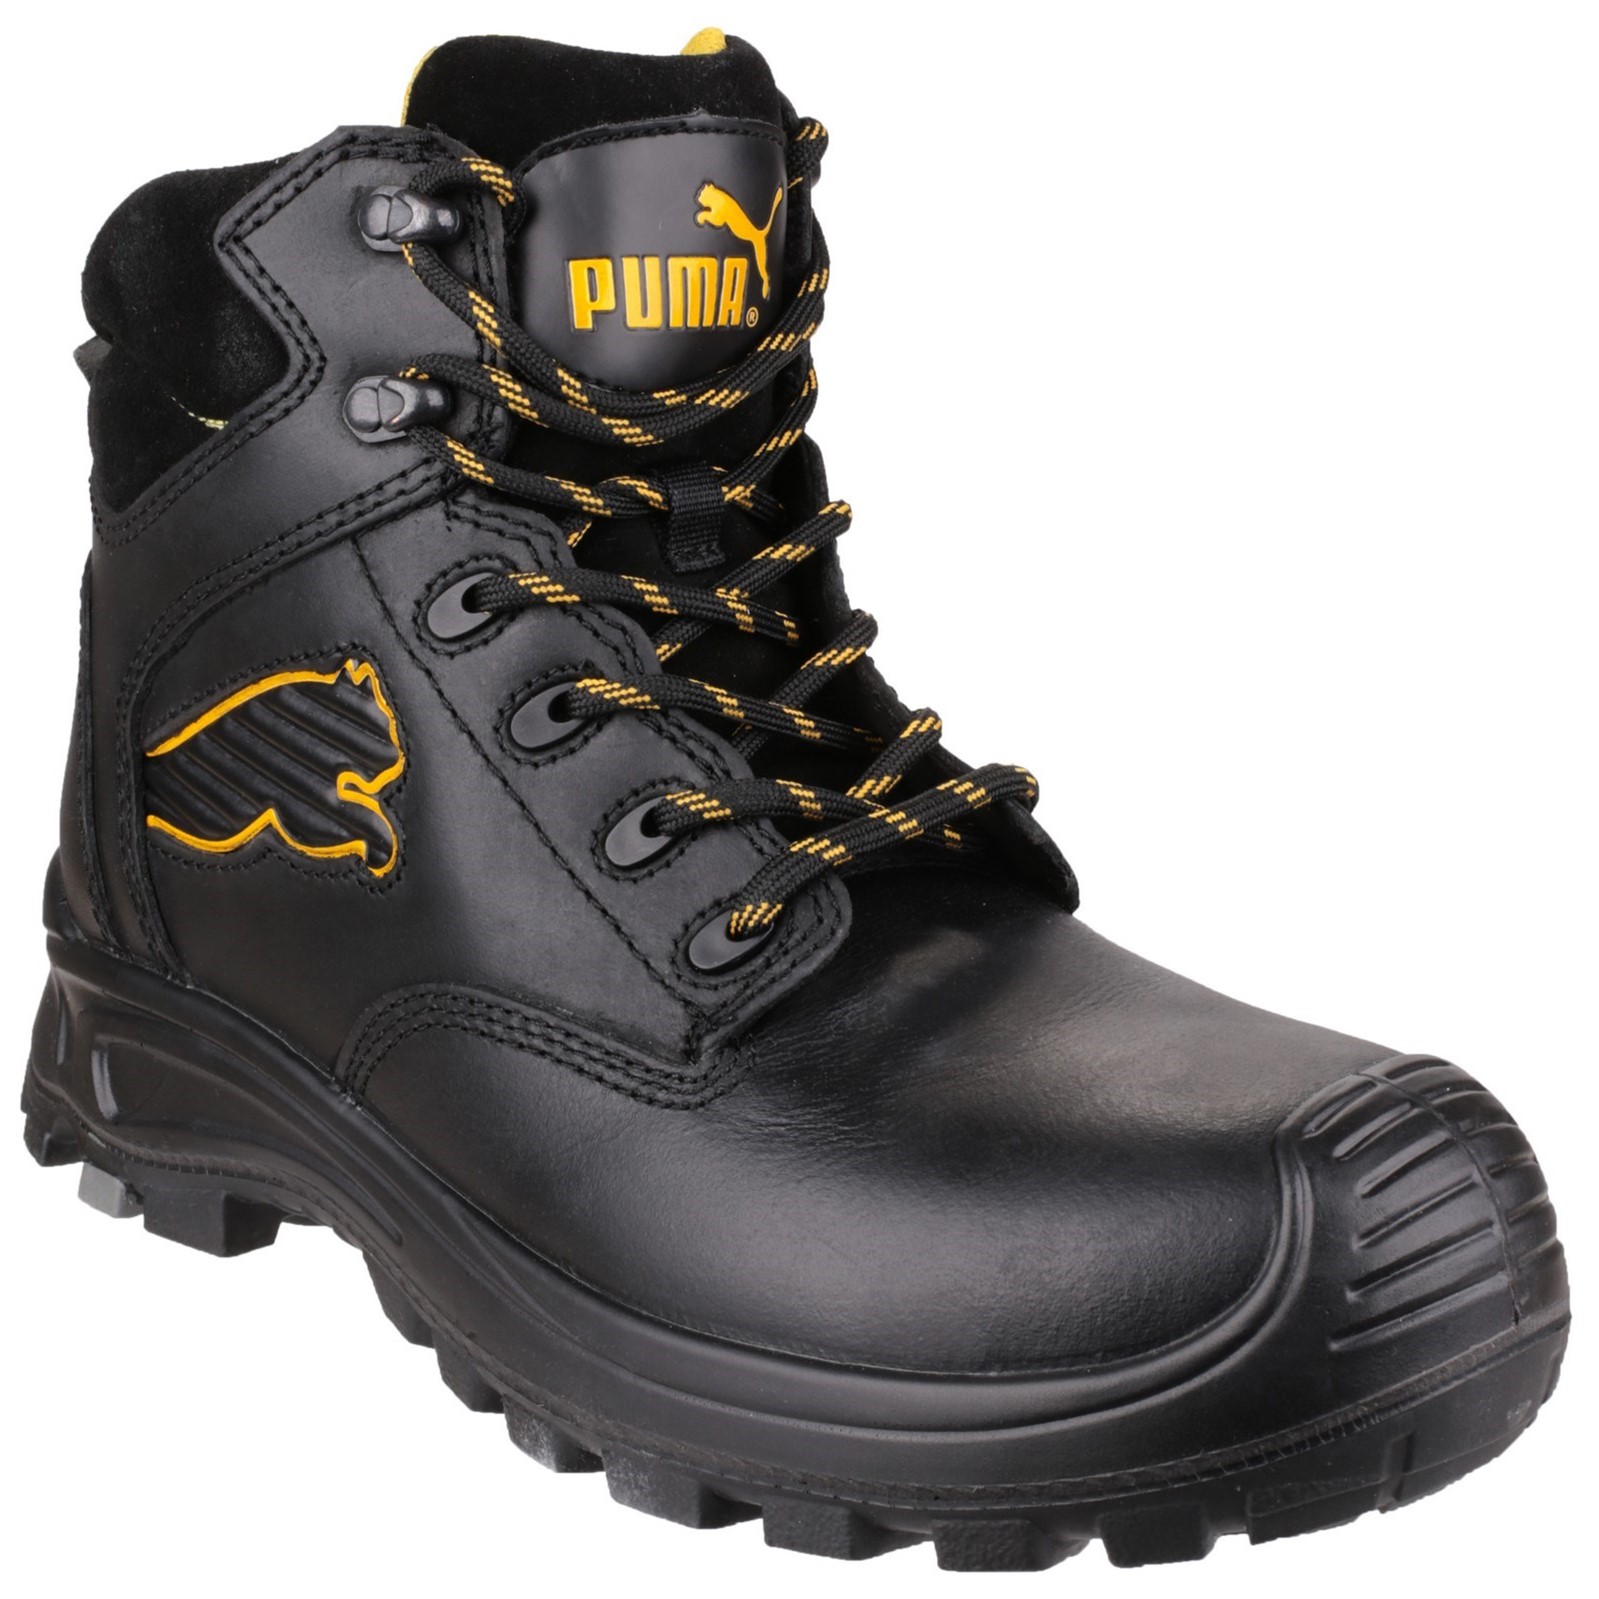 Borneo Mid S3 Safety Boot